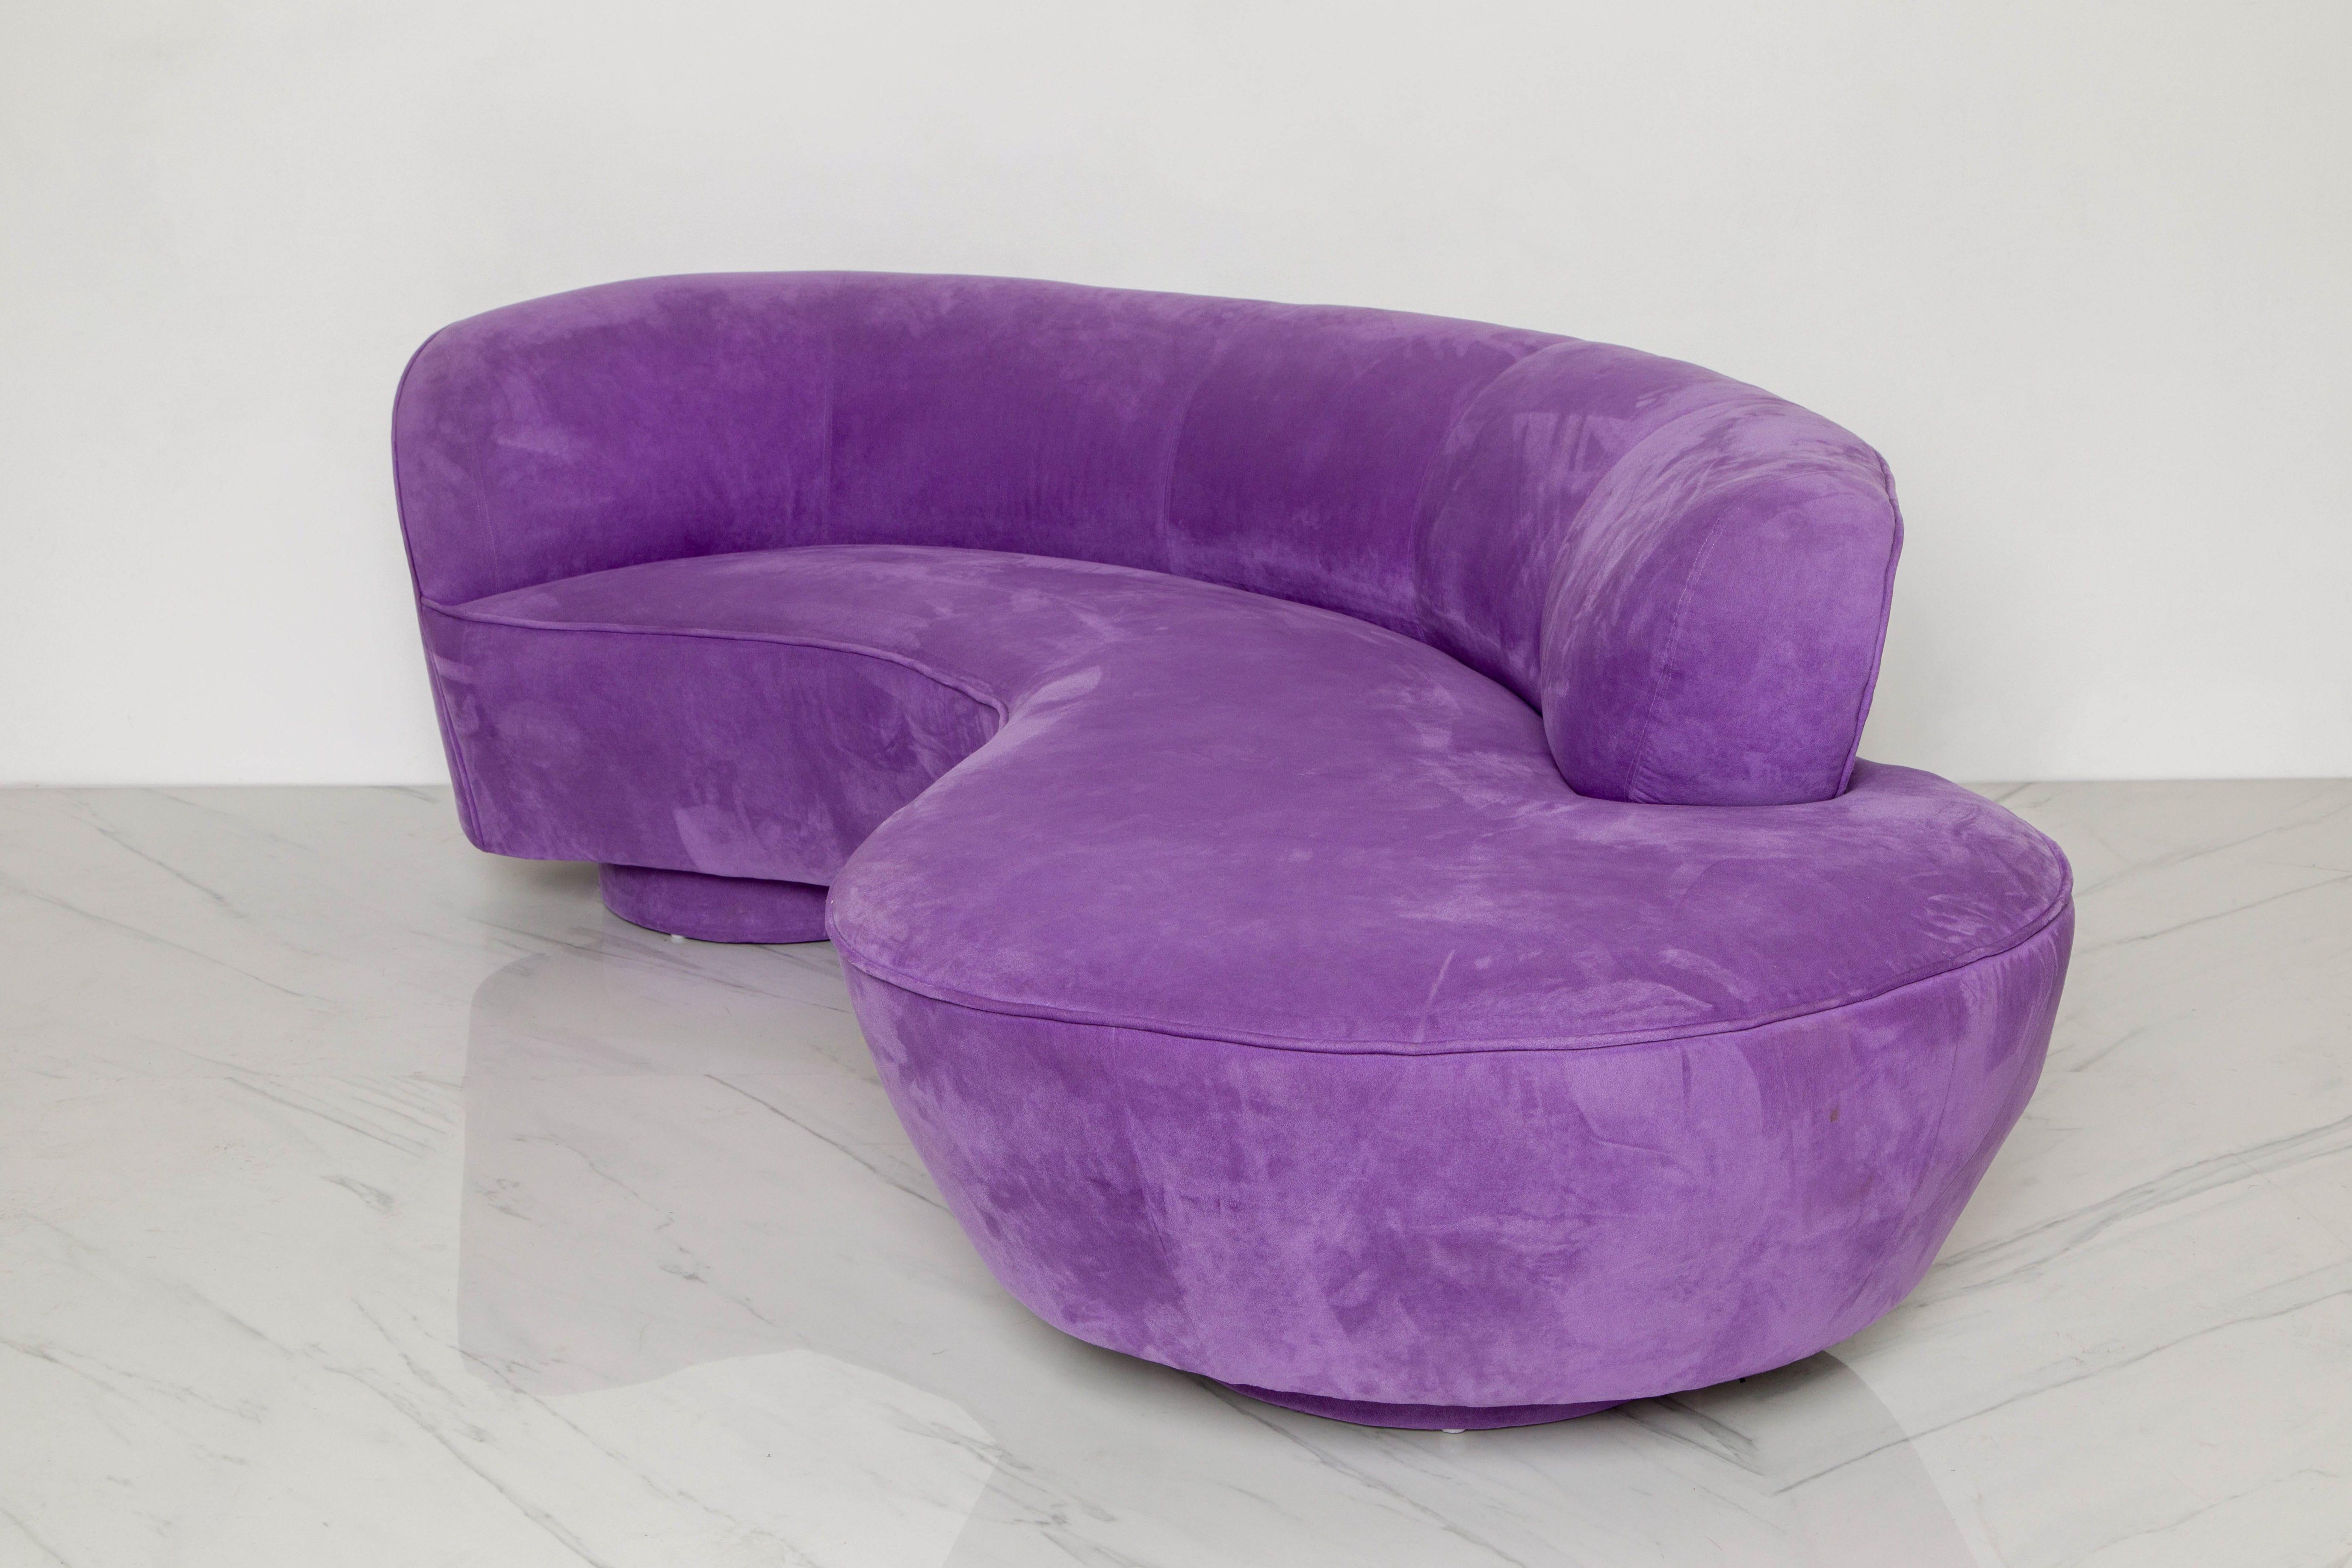 'Cloud' Sofa by Vladimir Kagan for Directional w Lucite Leg, 1980s, Signed 11